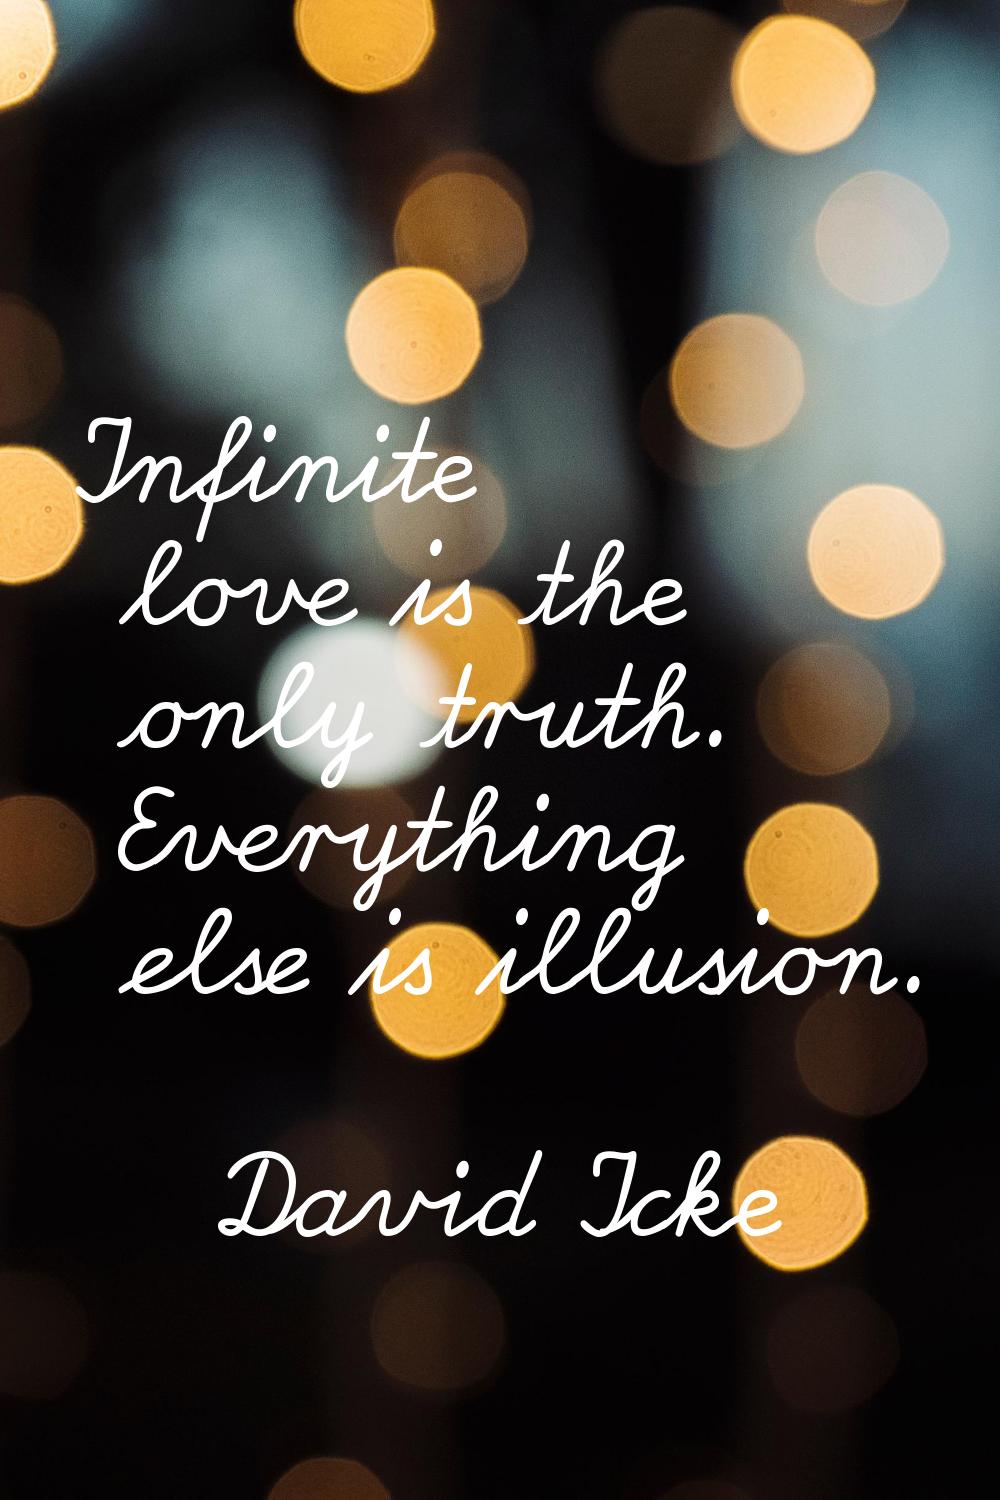 Infinite love is the only truth. Everything else is illusion.